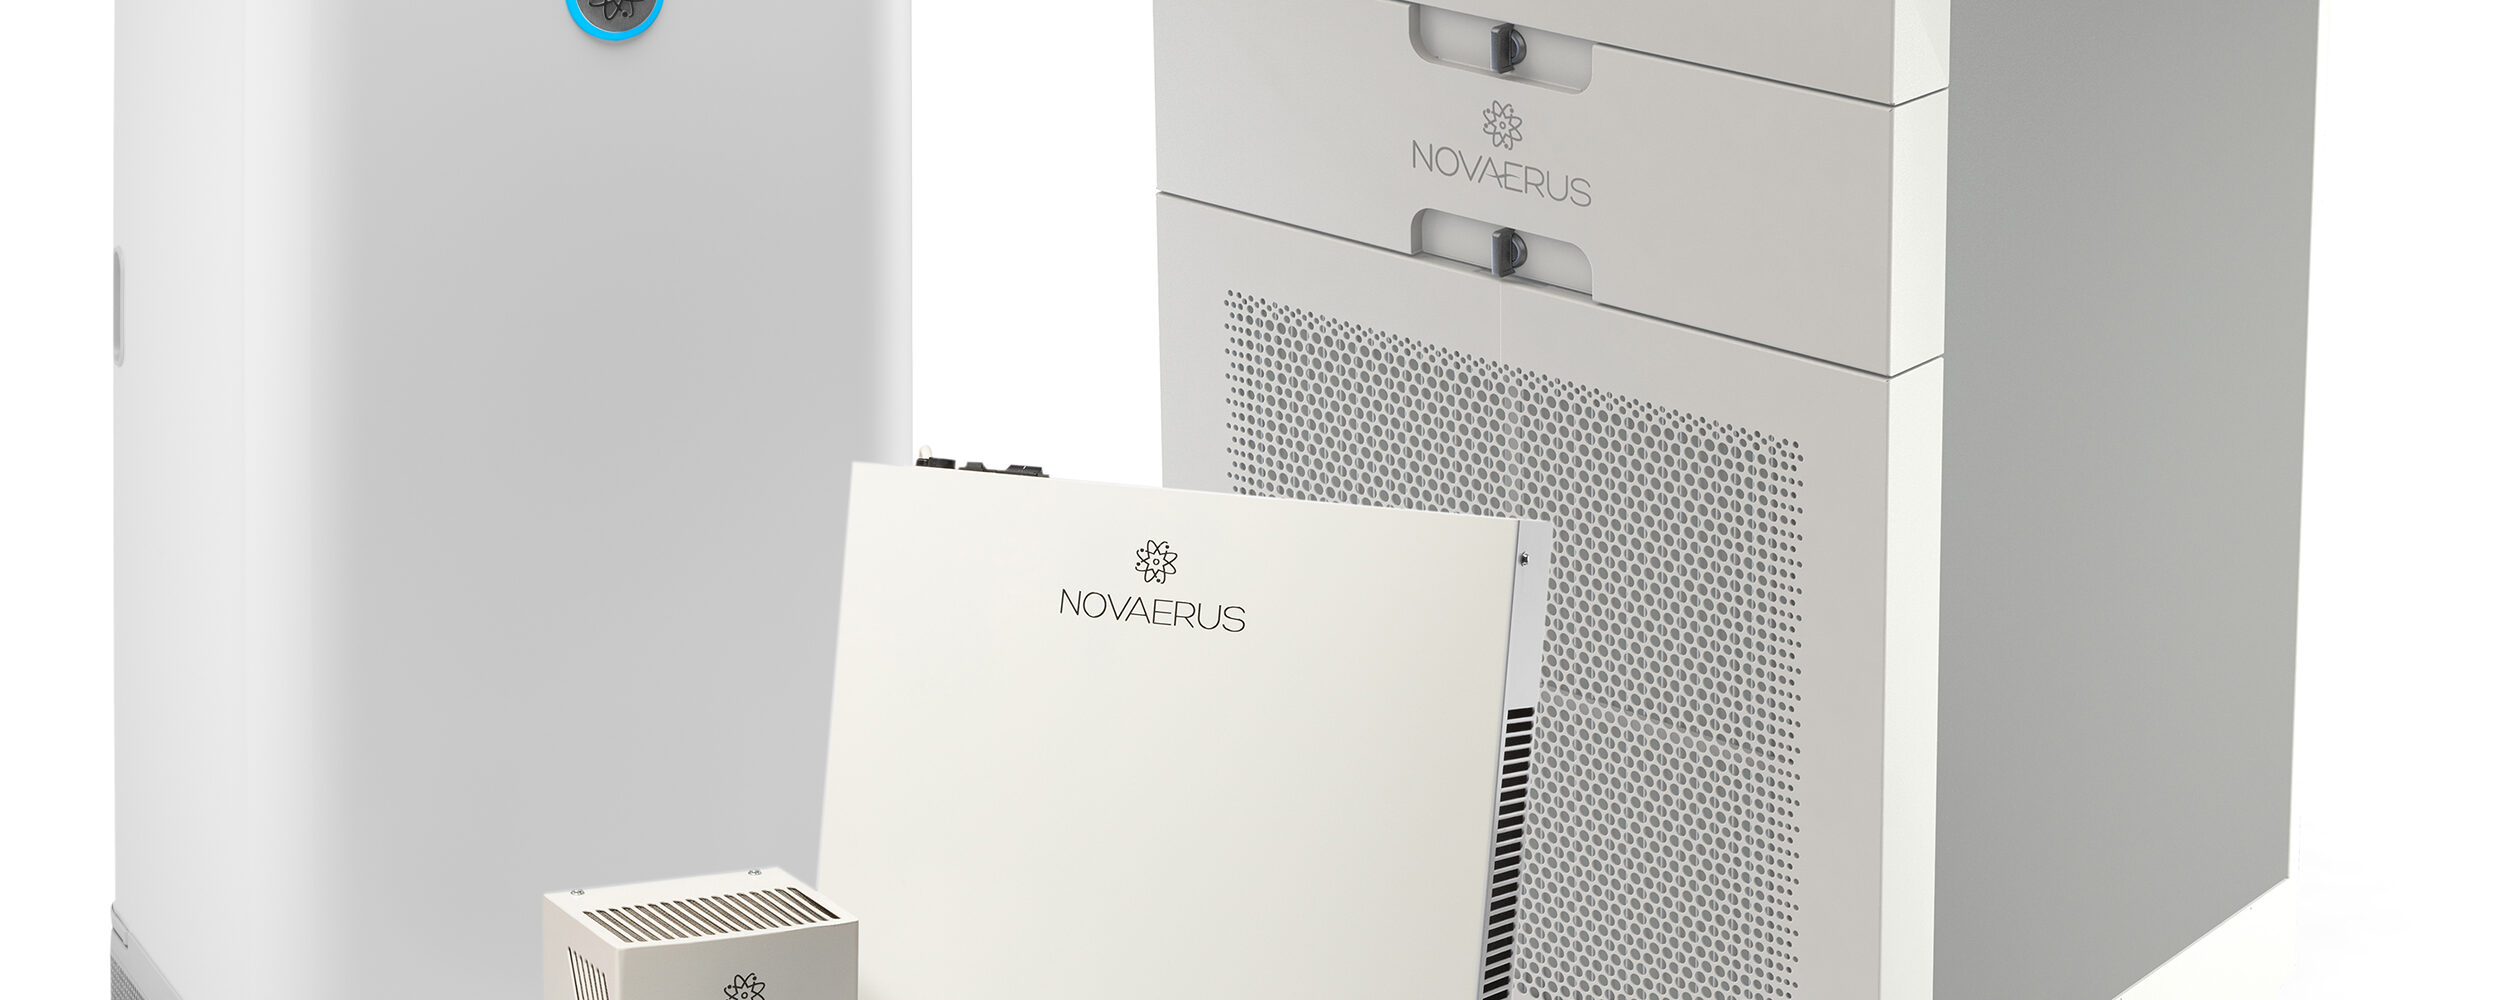 PDI EMEA appointed the official UK Healthcare representative for WellAir’s Novaerus Air Cleaning Solutions